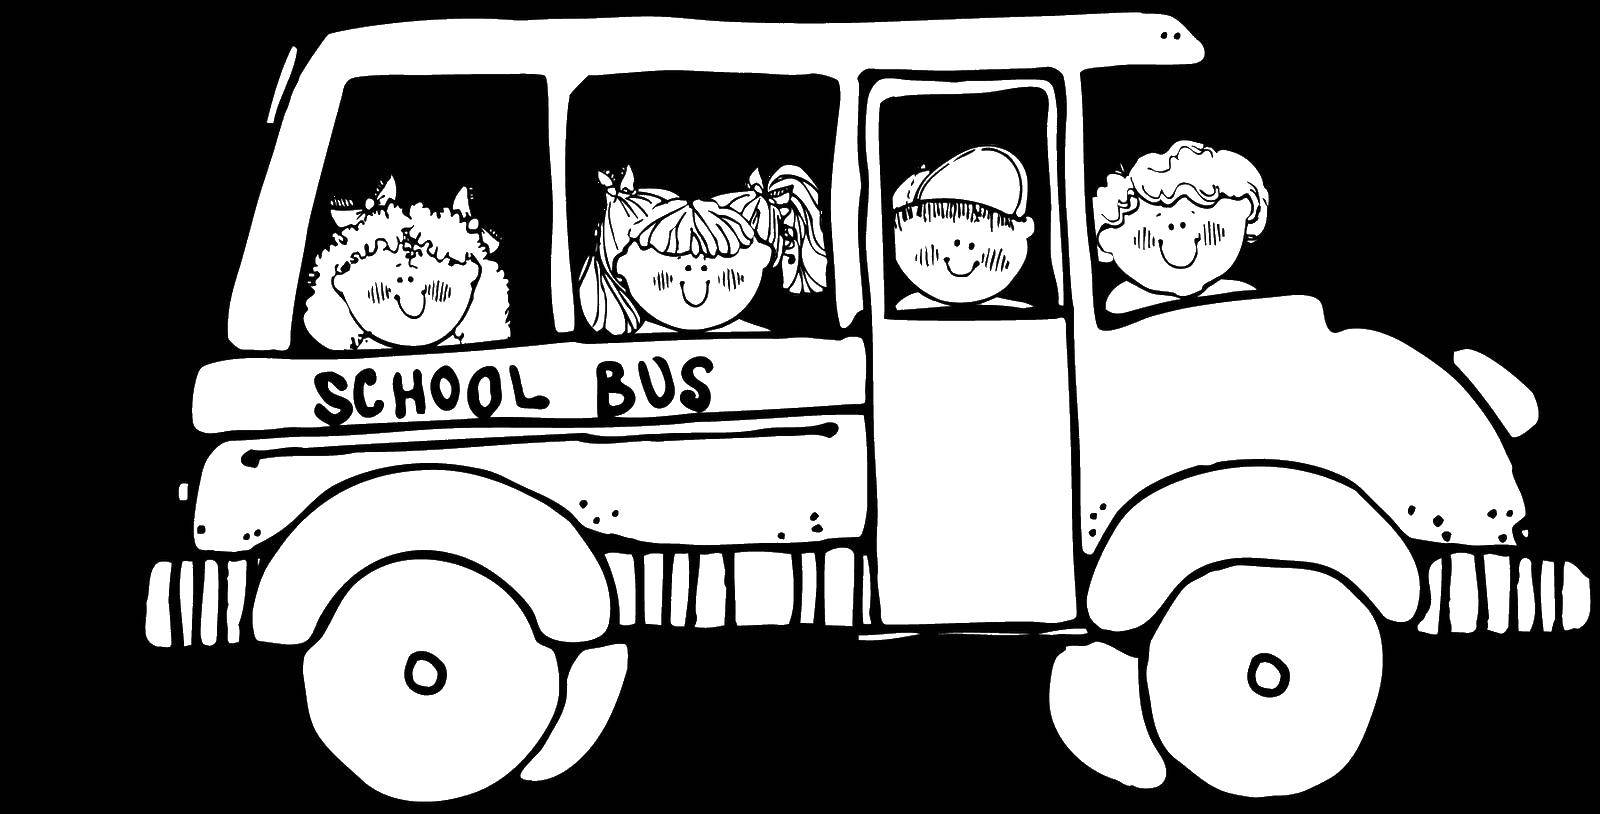 Coloring School bus. Category The contour of the bus. Tags:  the bus.